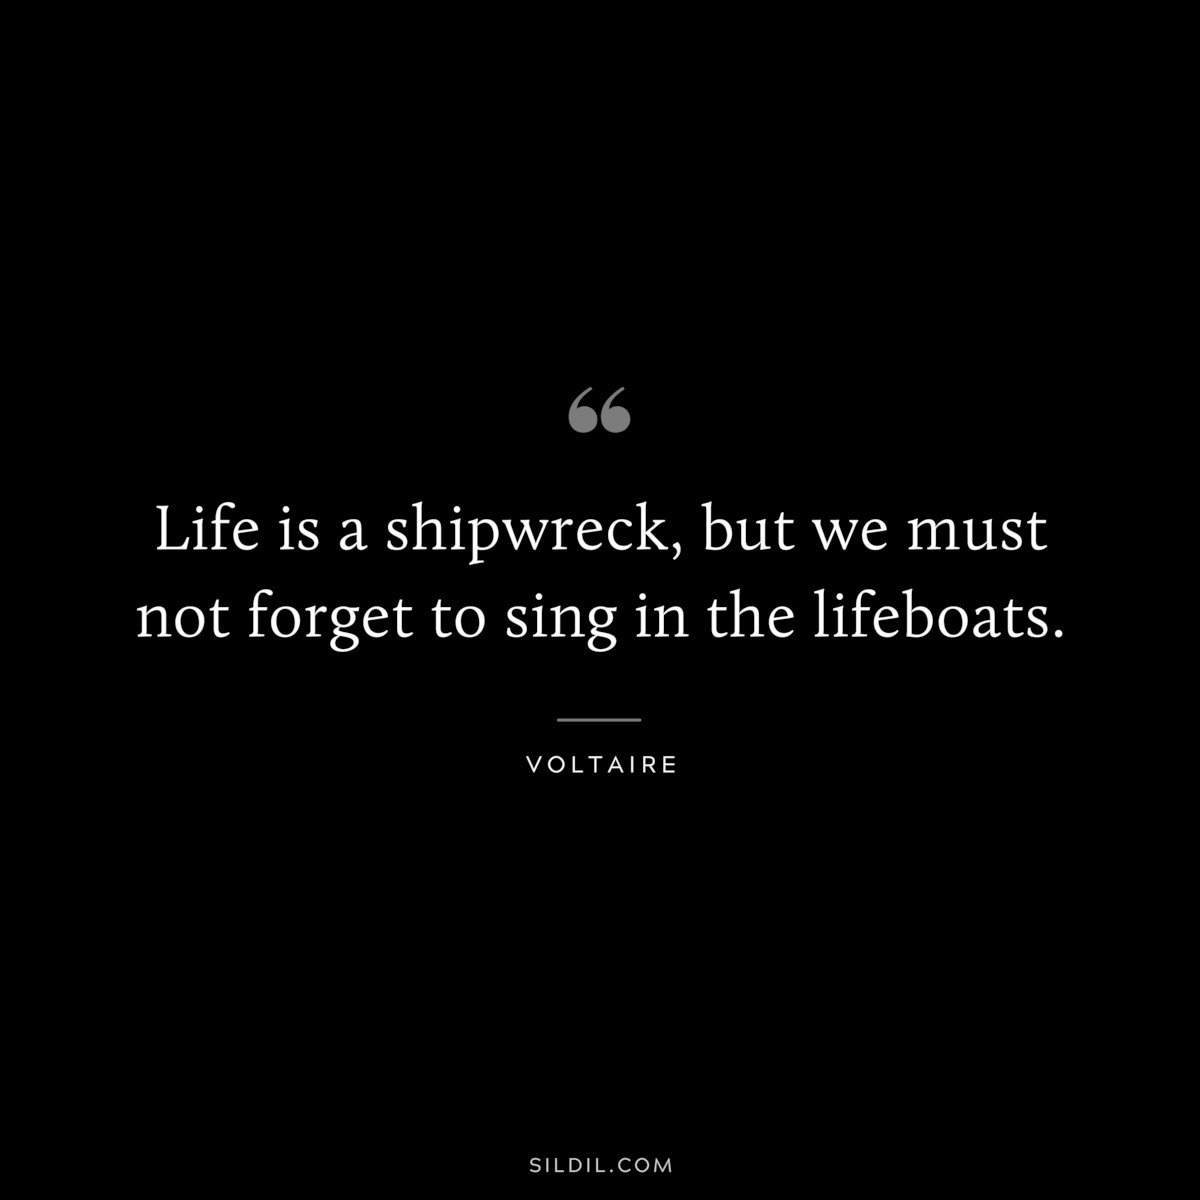 Life is a shipwreck, but we must not forget to sing in the lifeboats. ― Voltaire